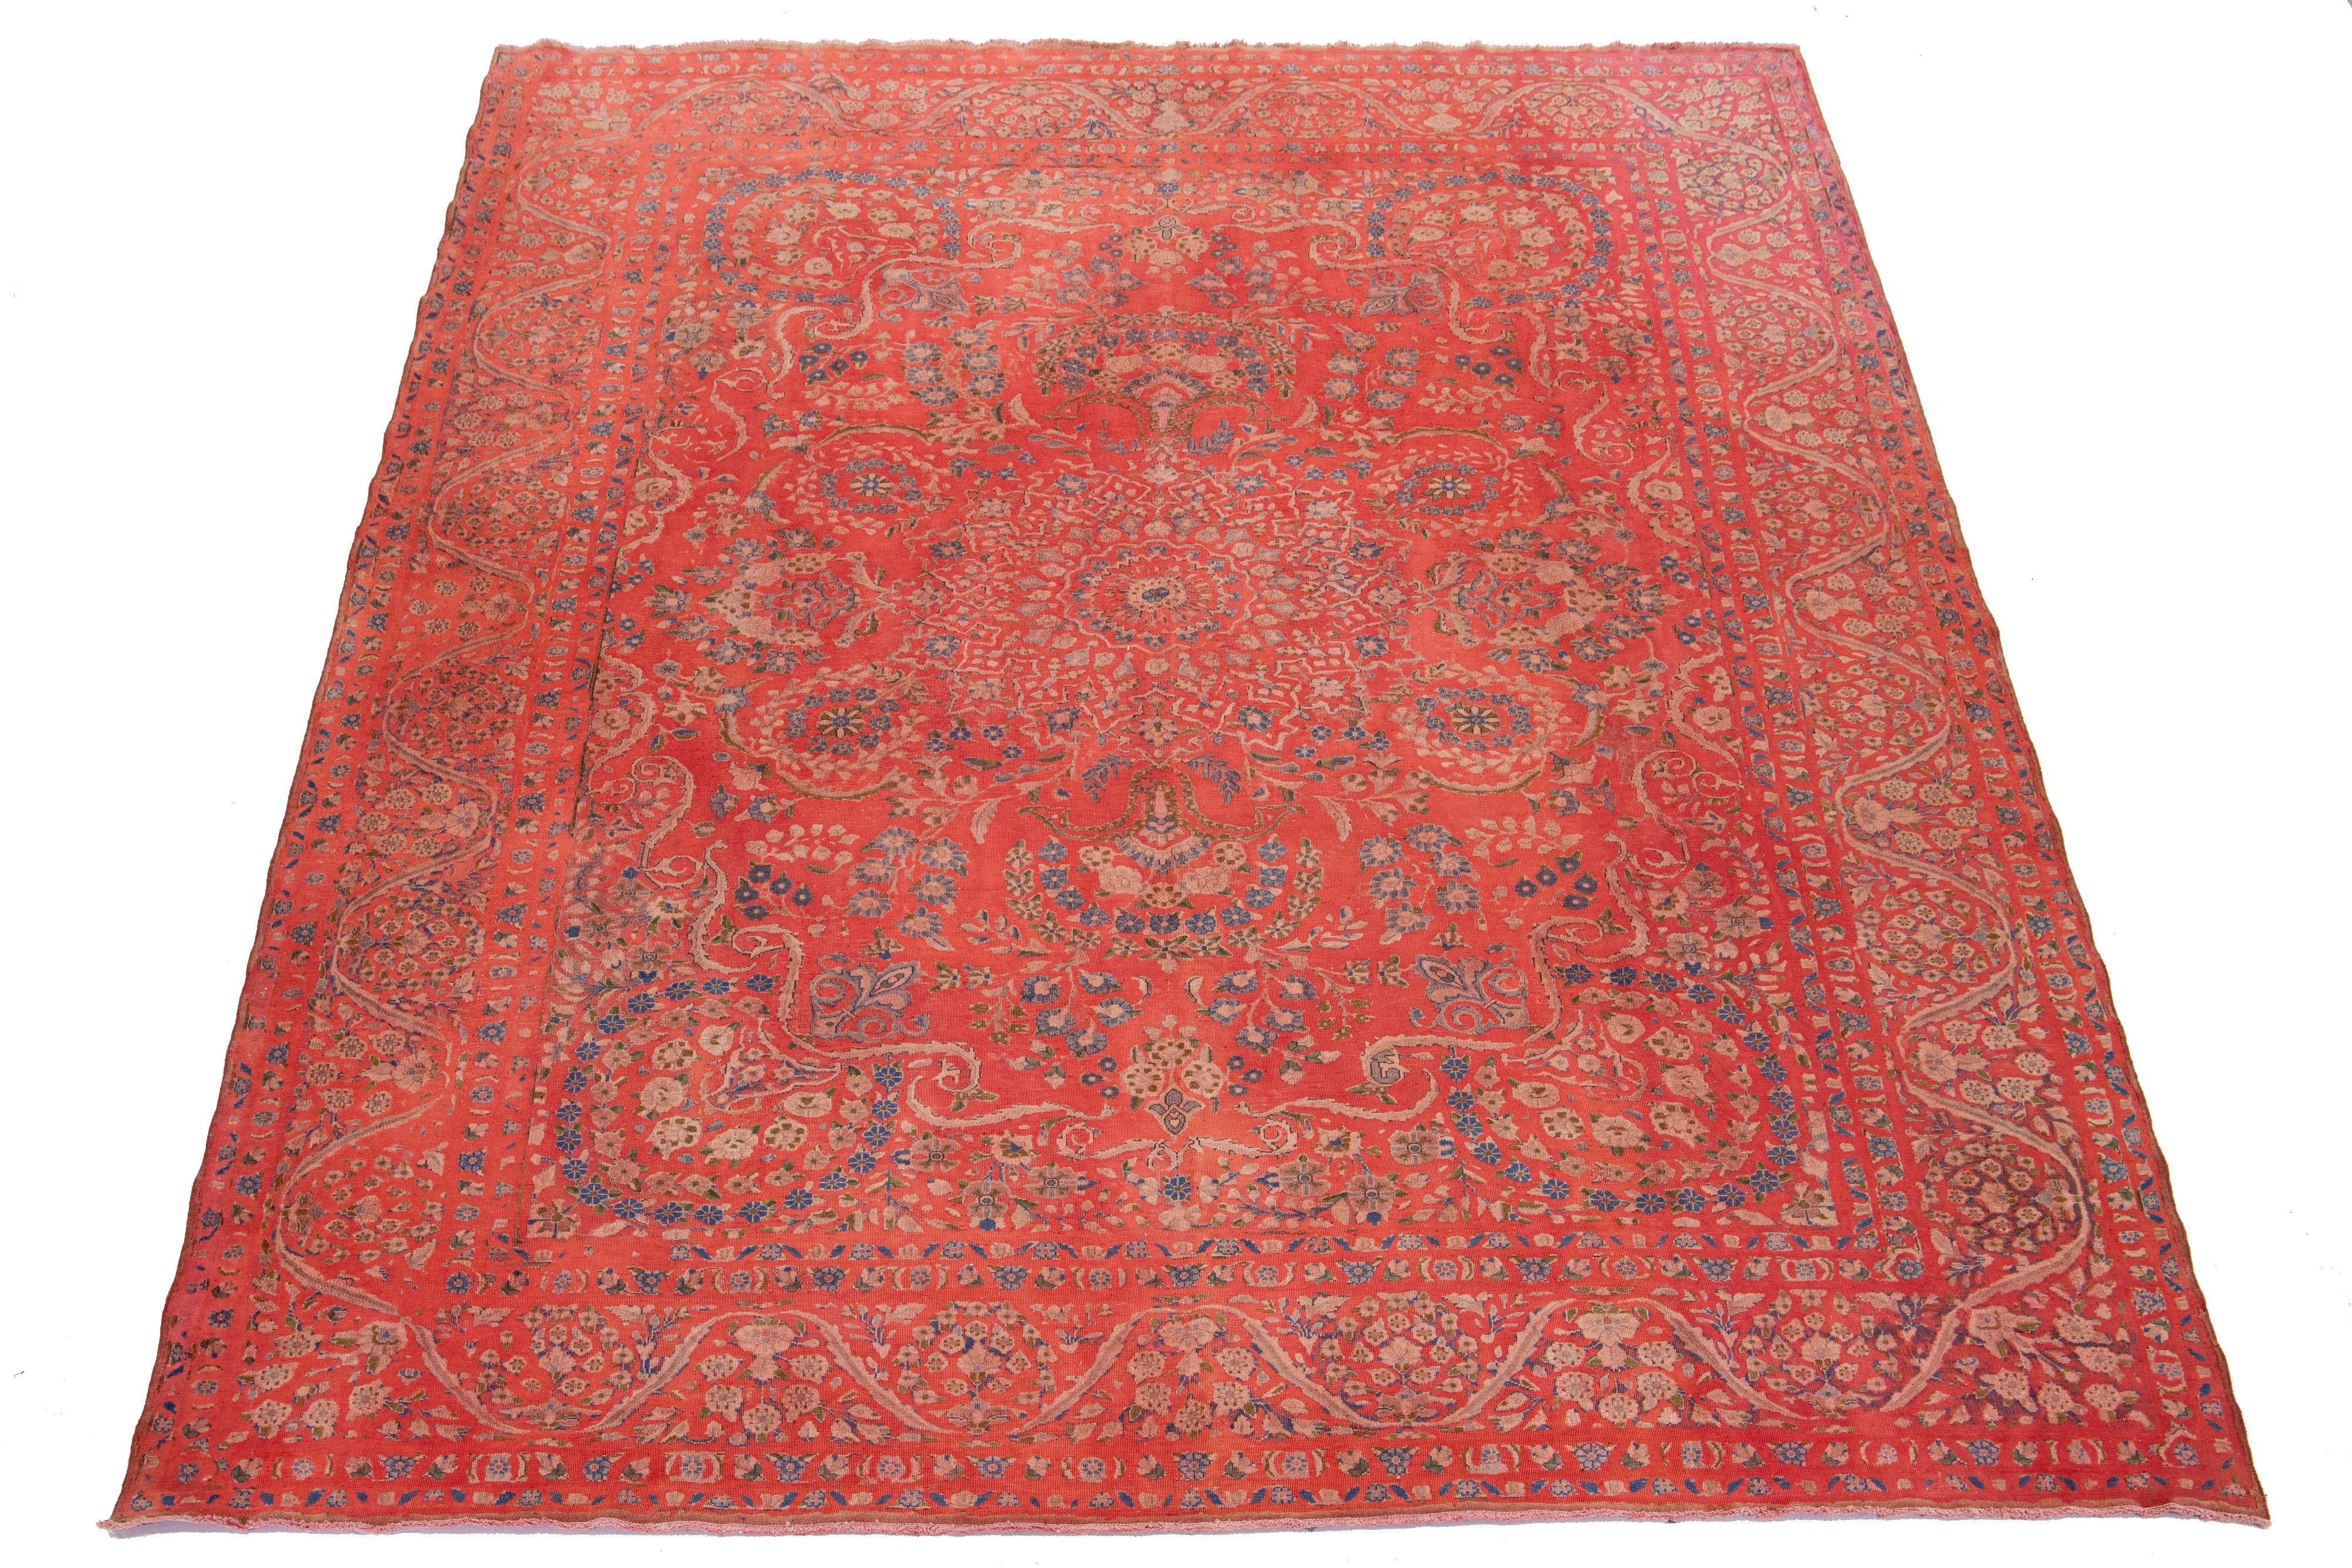 This antique red  Overdyed Persian wool rug features a rosette design with blue, beige, and green accents.

This rug measures 9'10'' x 13'.